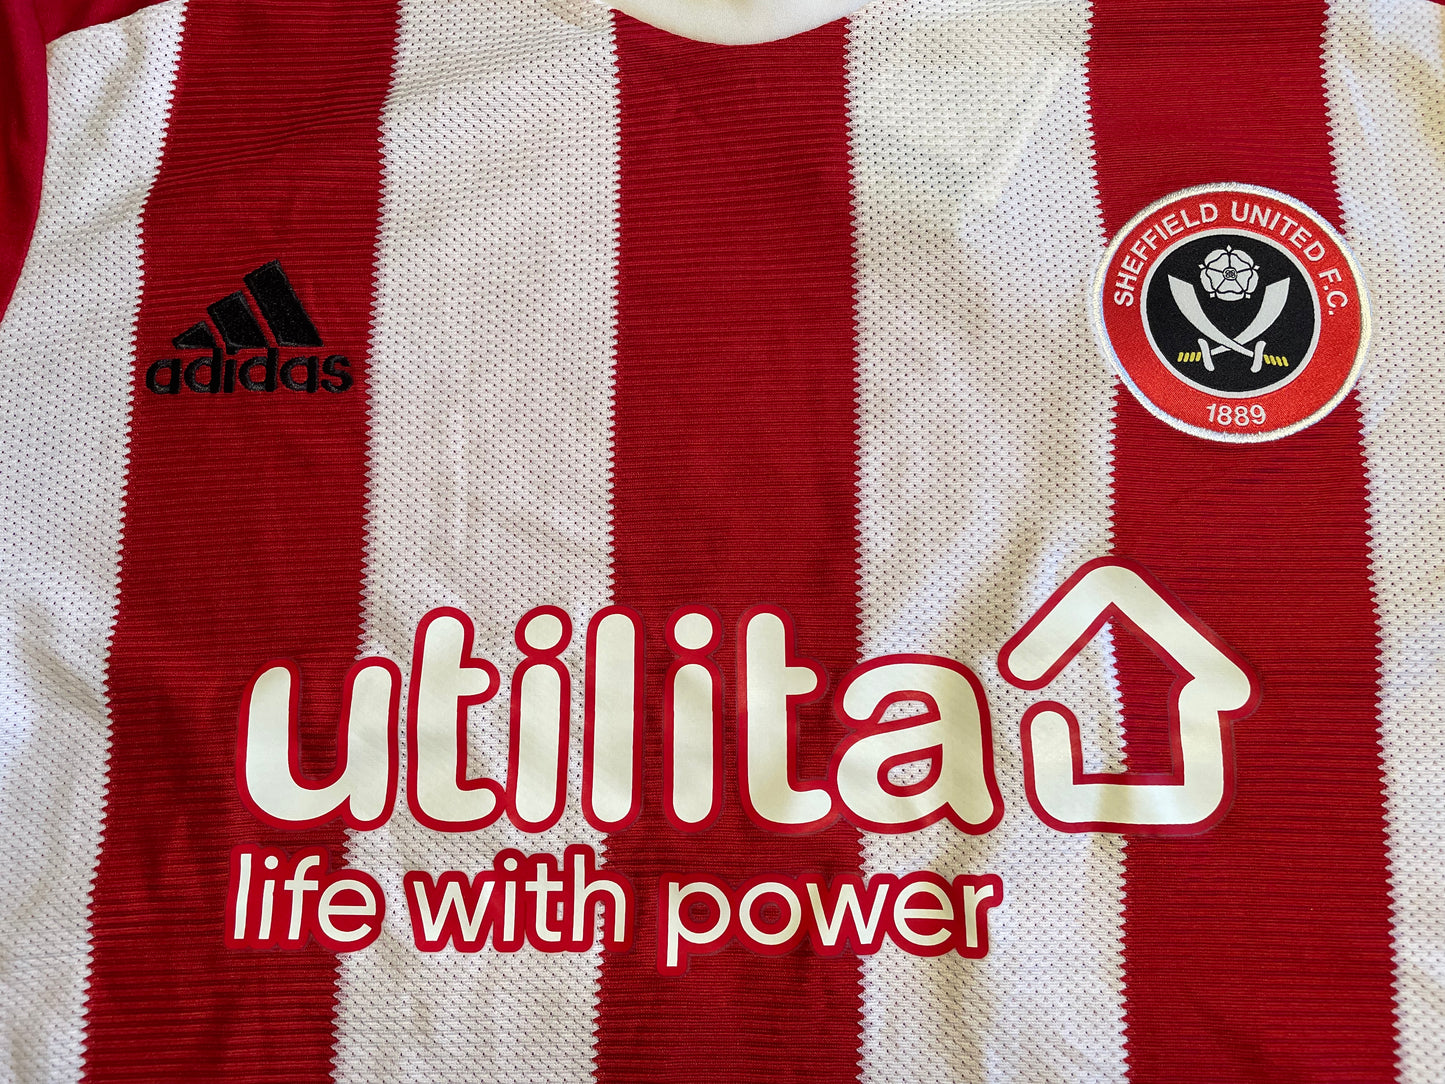 Sheffield United 2019 Home Shirt (excellent) Adults XS/Youths 15 to 16 years. Height 23.5 inches